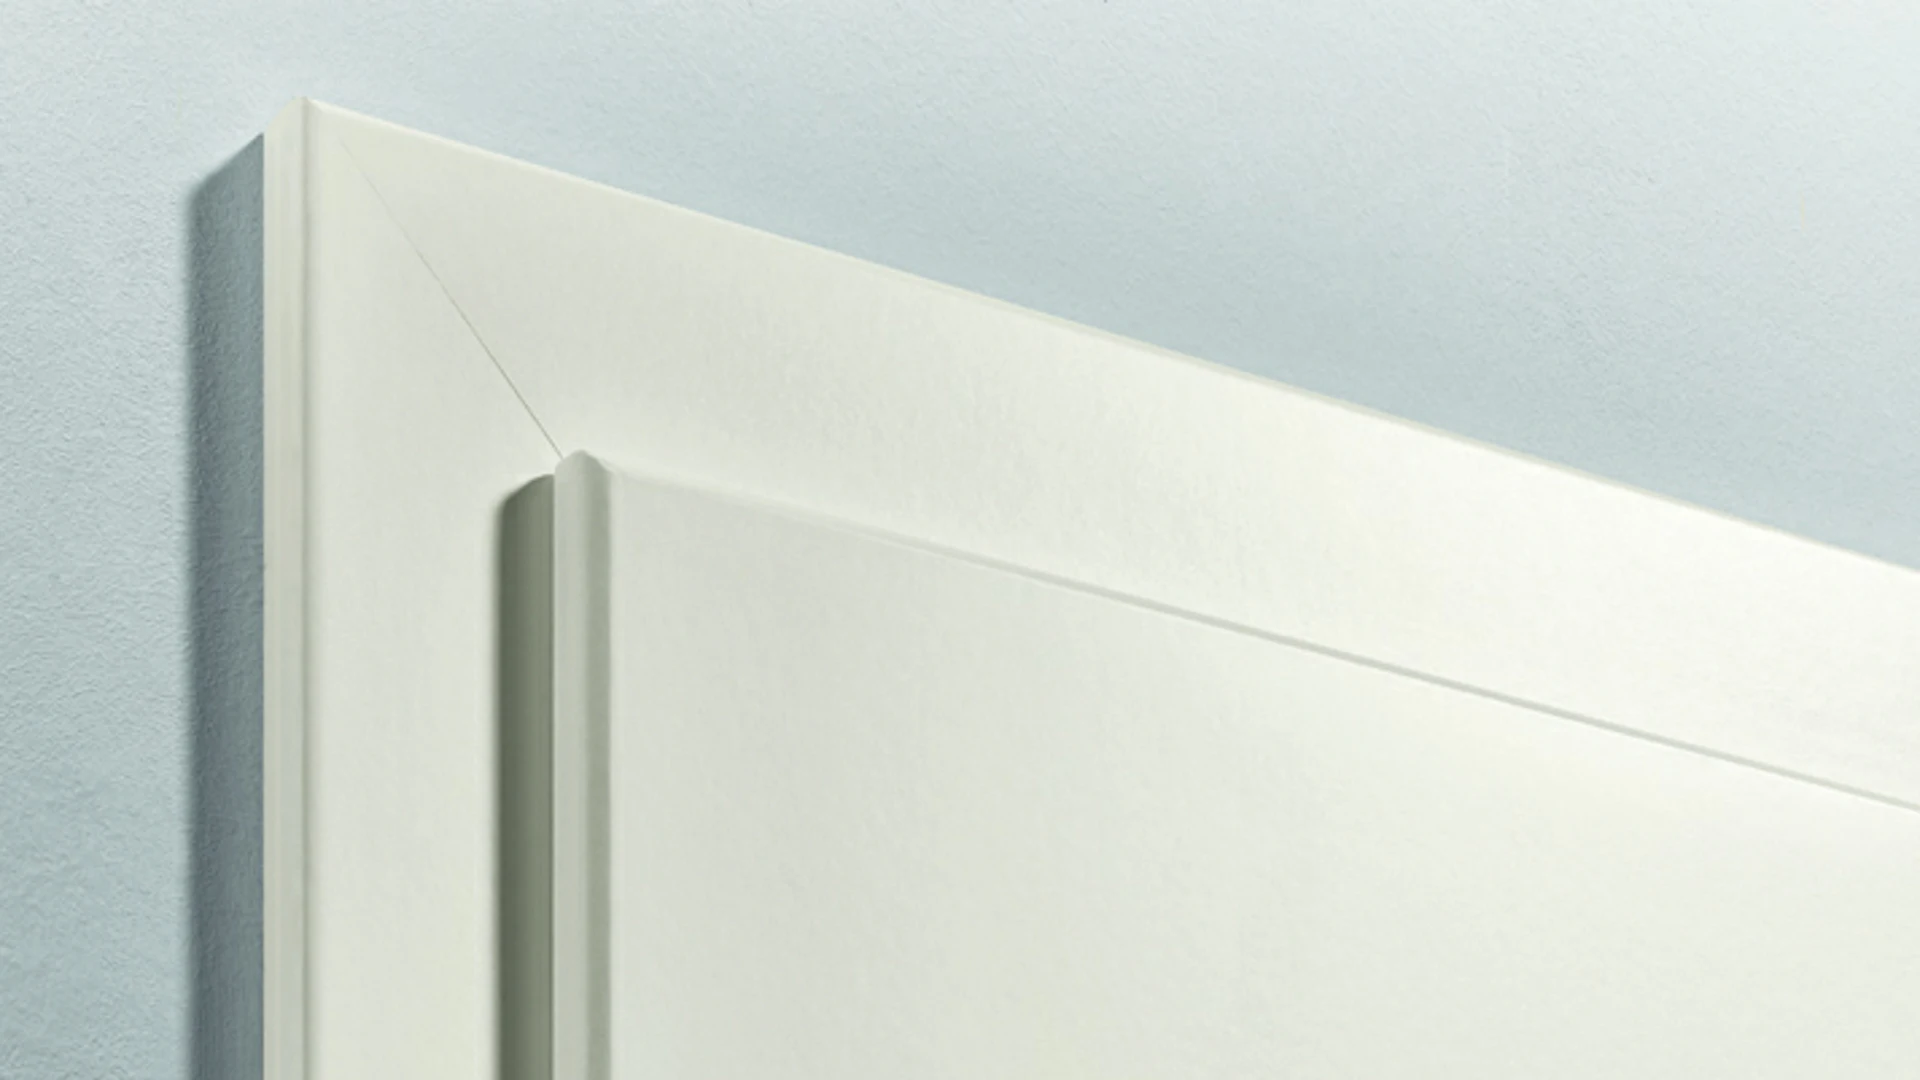 planeo standard frame round edge - white lacquer 9010 - 2110mm